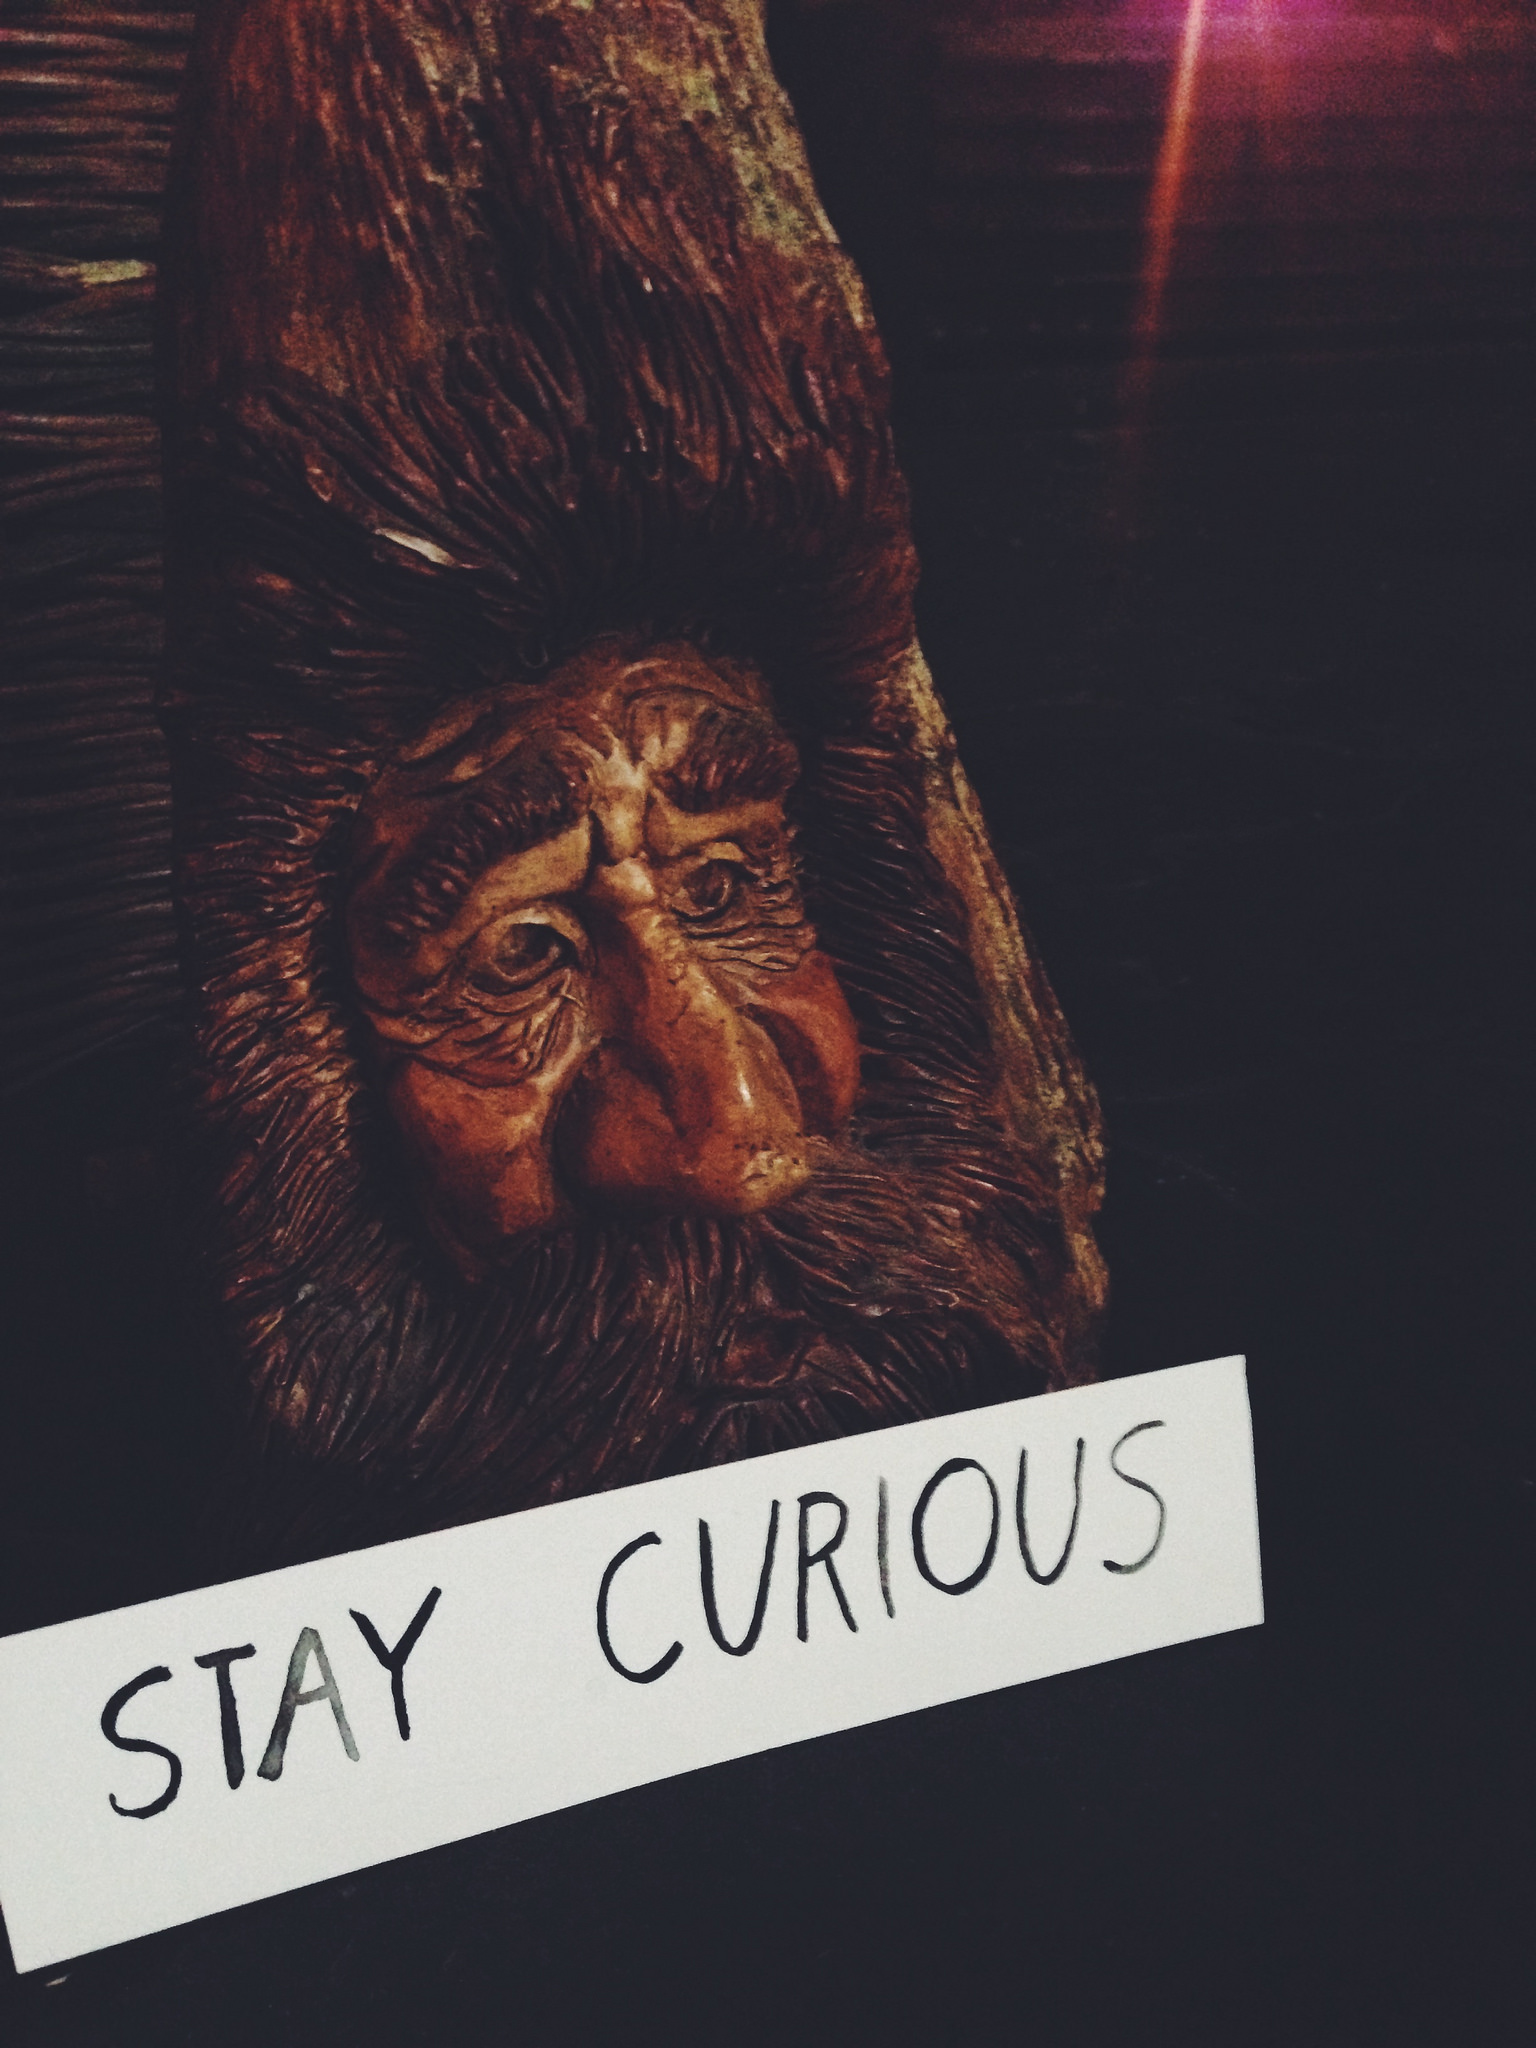 Truly North Retreat// Stay Curious